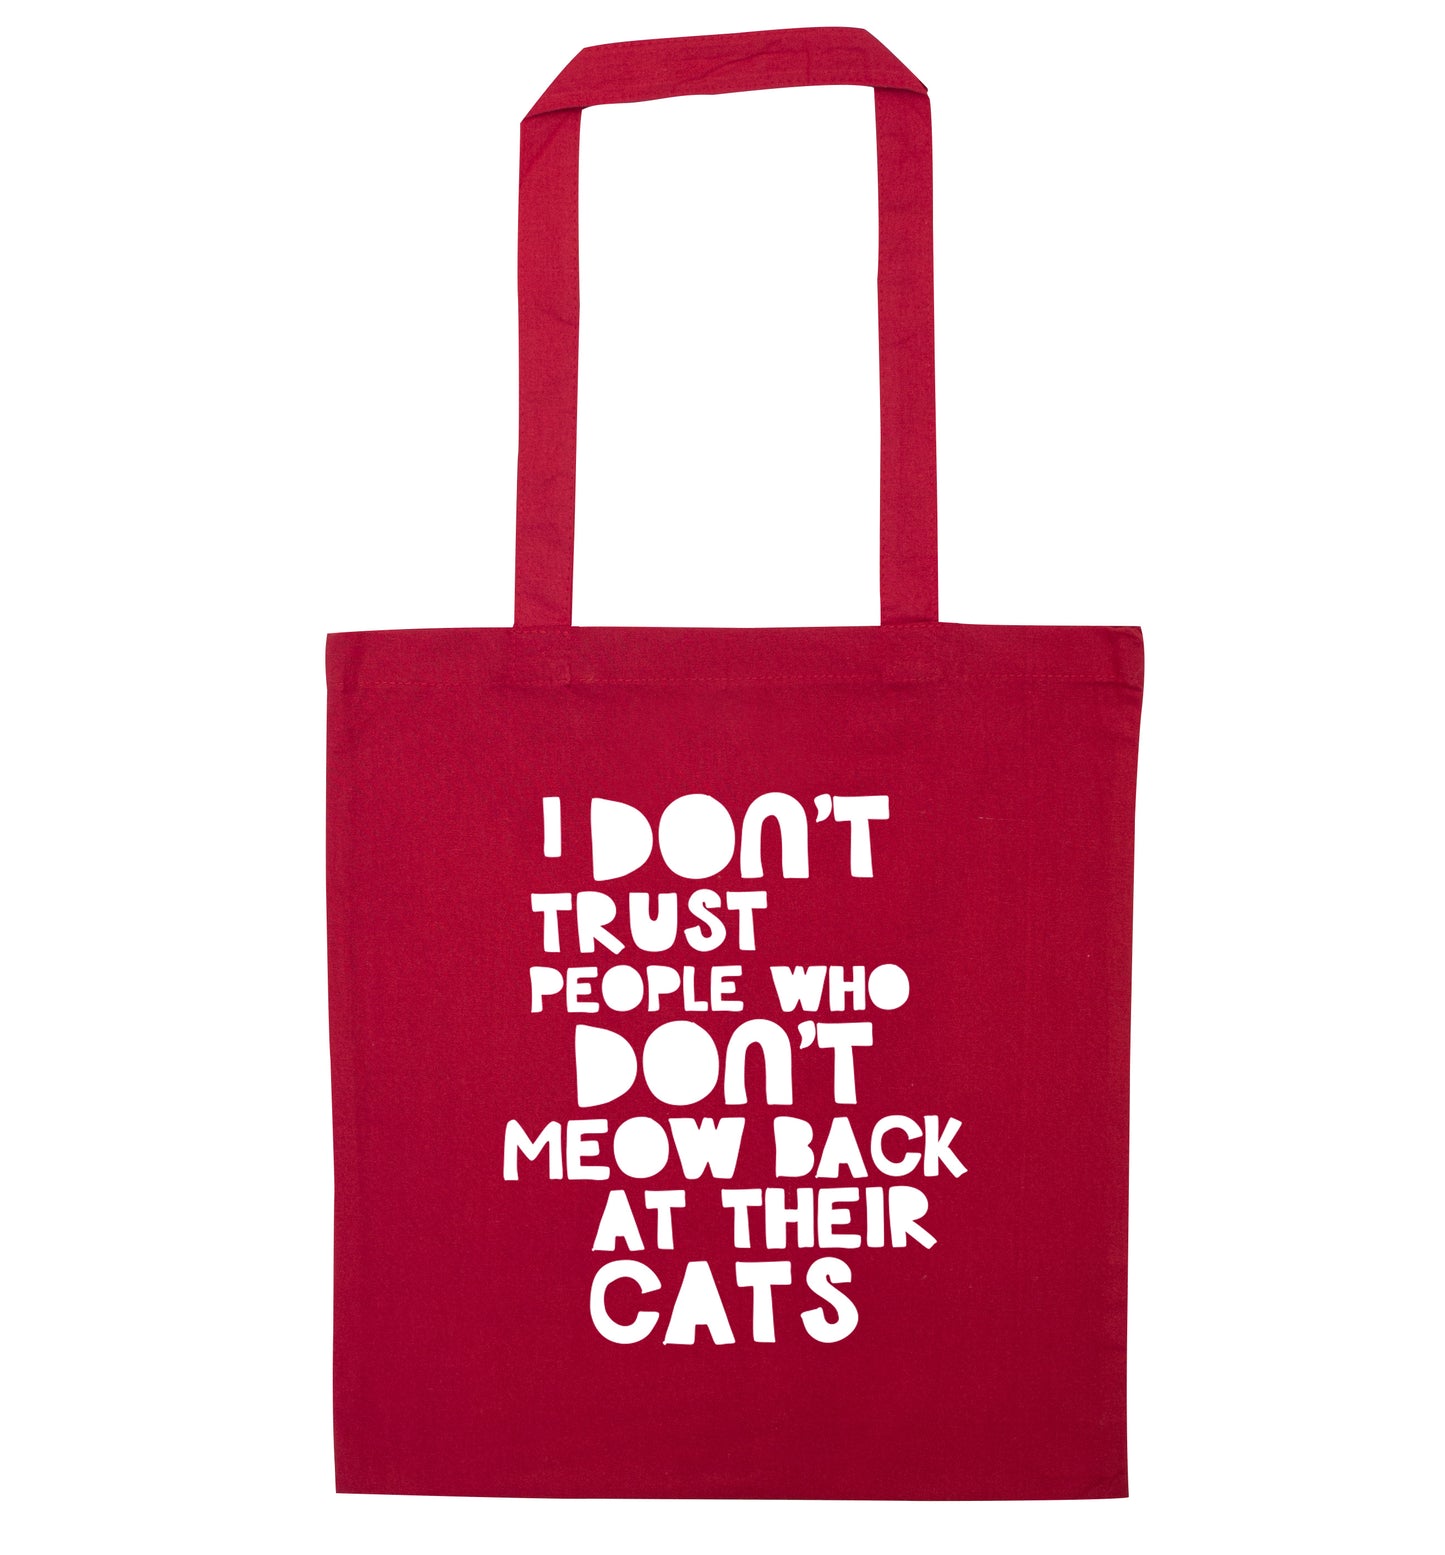 I don't trust people who don't meow back at their cats red tote bag